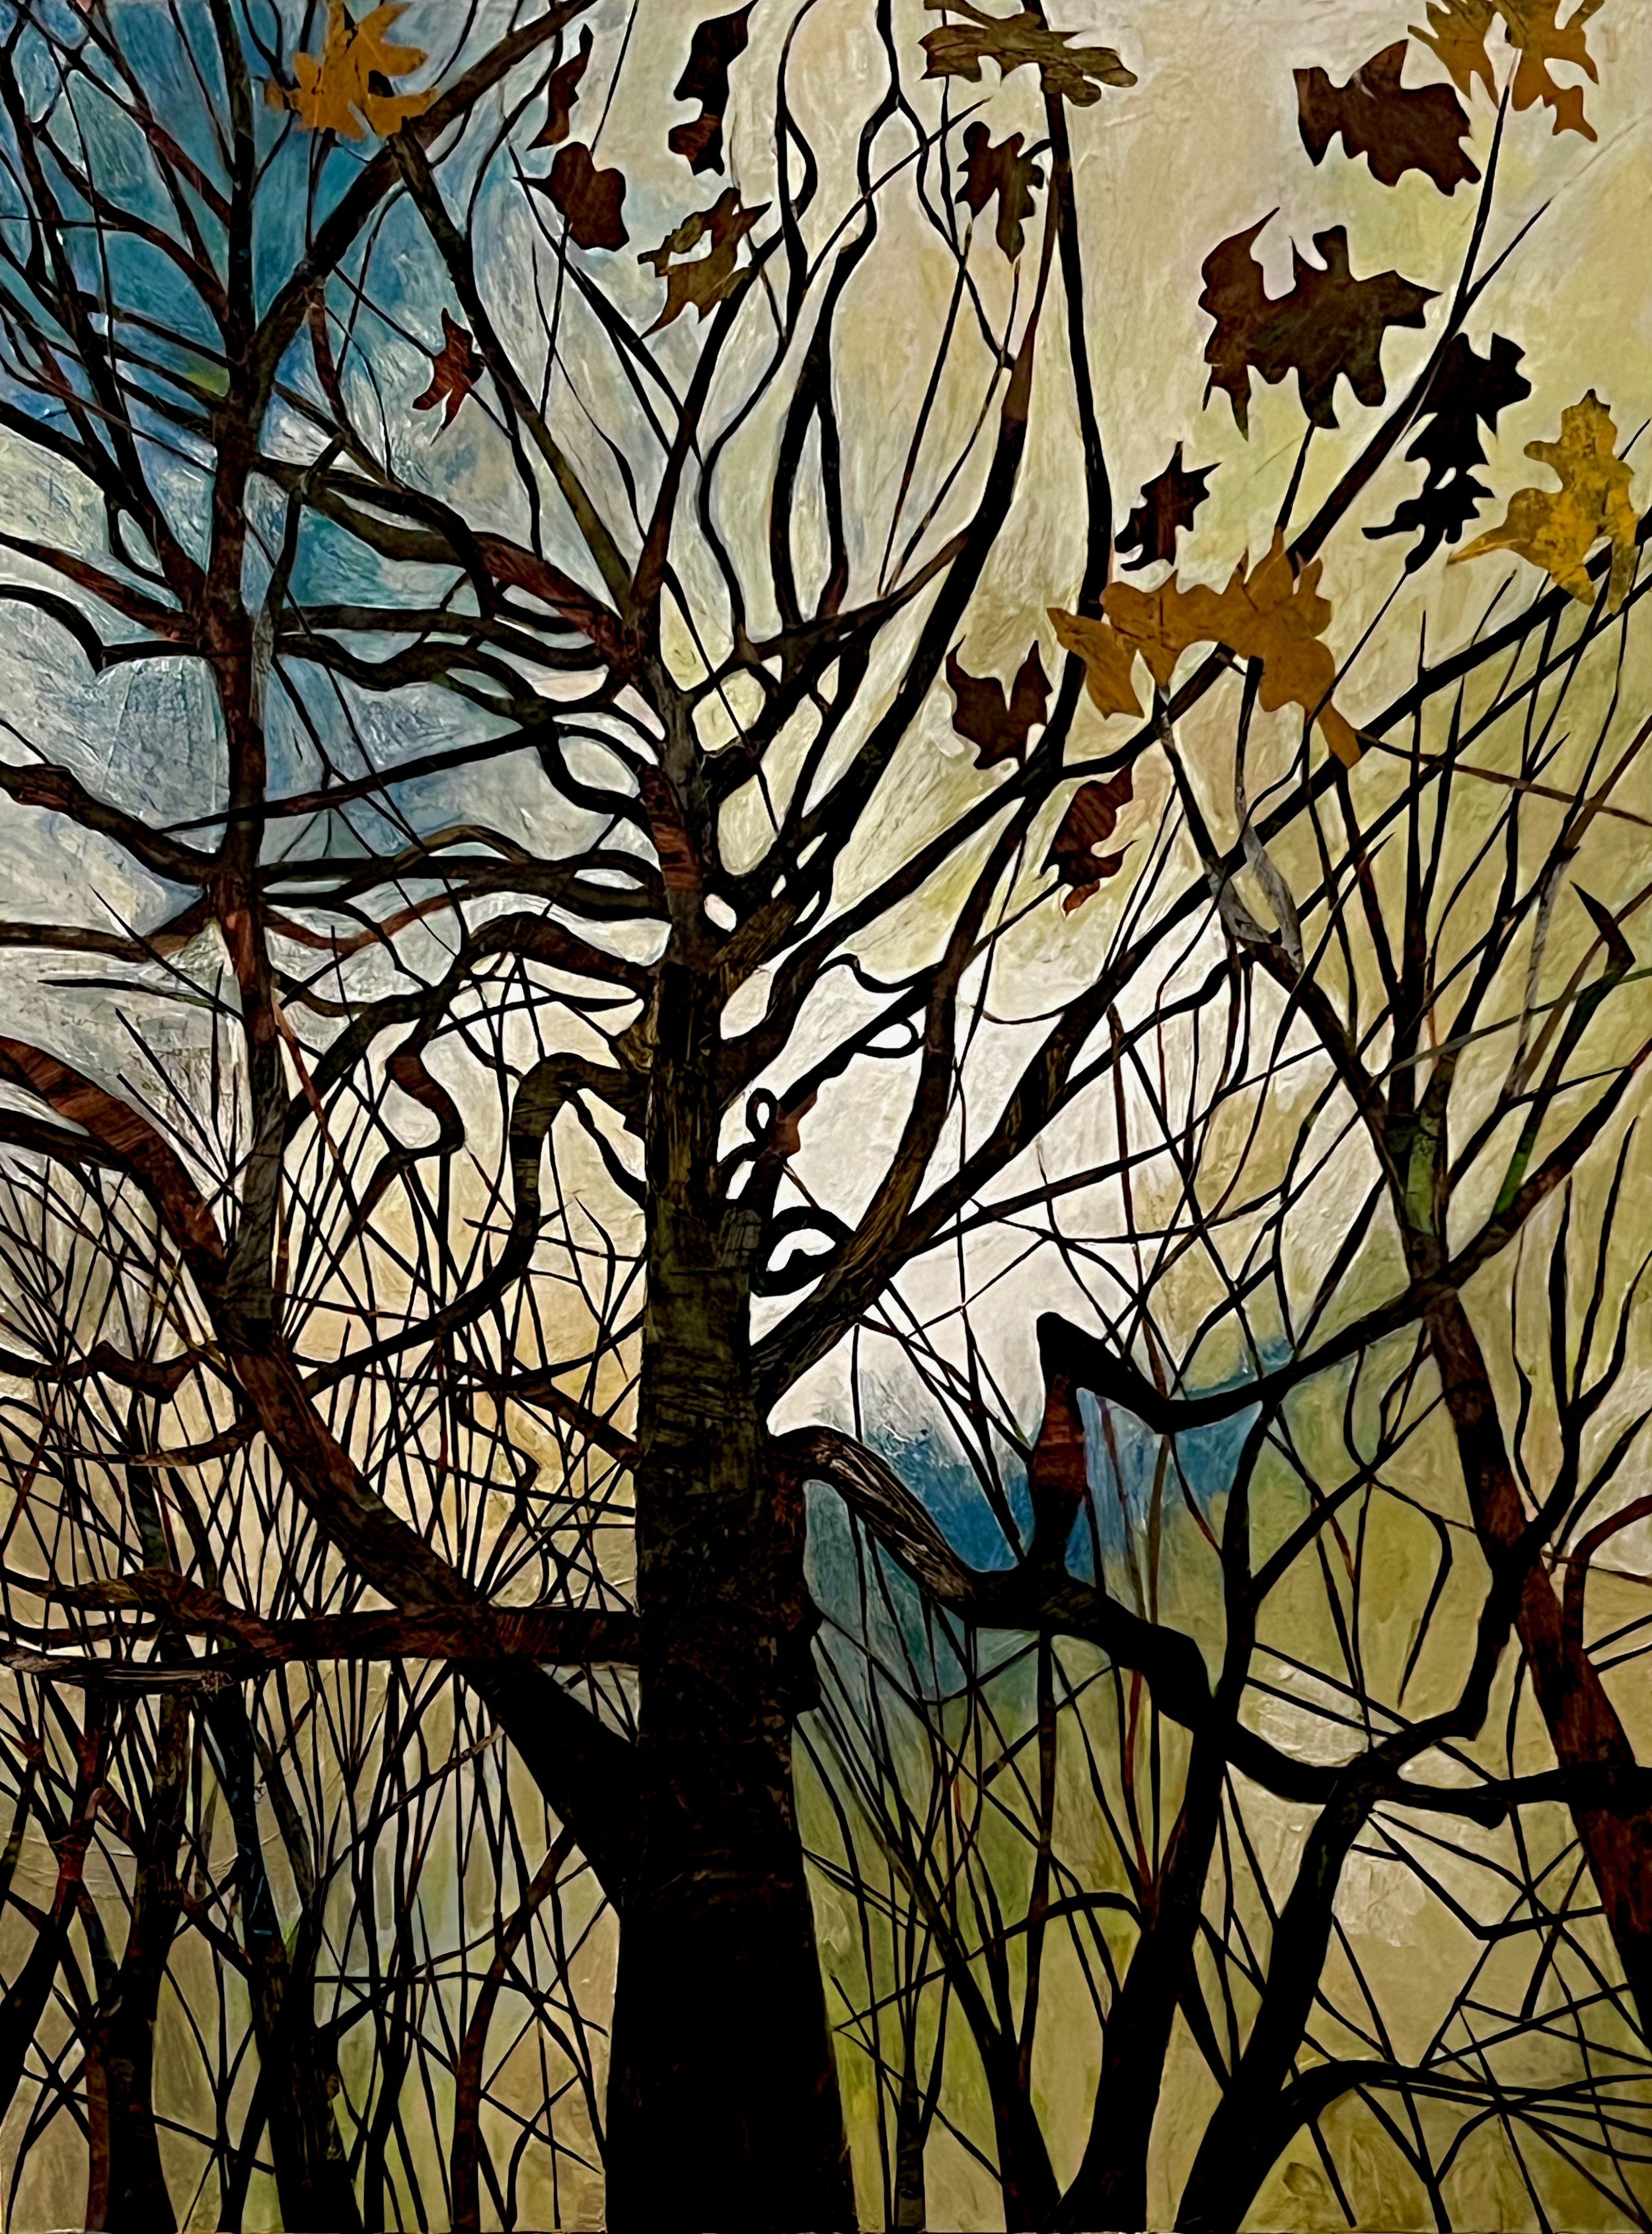 White Oak (Quercus alba), 2023, Acrylic and collage on wood panel, 48x36”, $3000